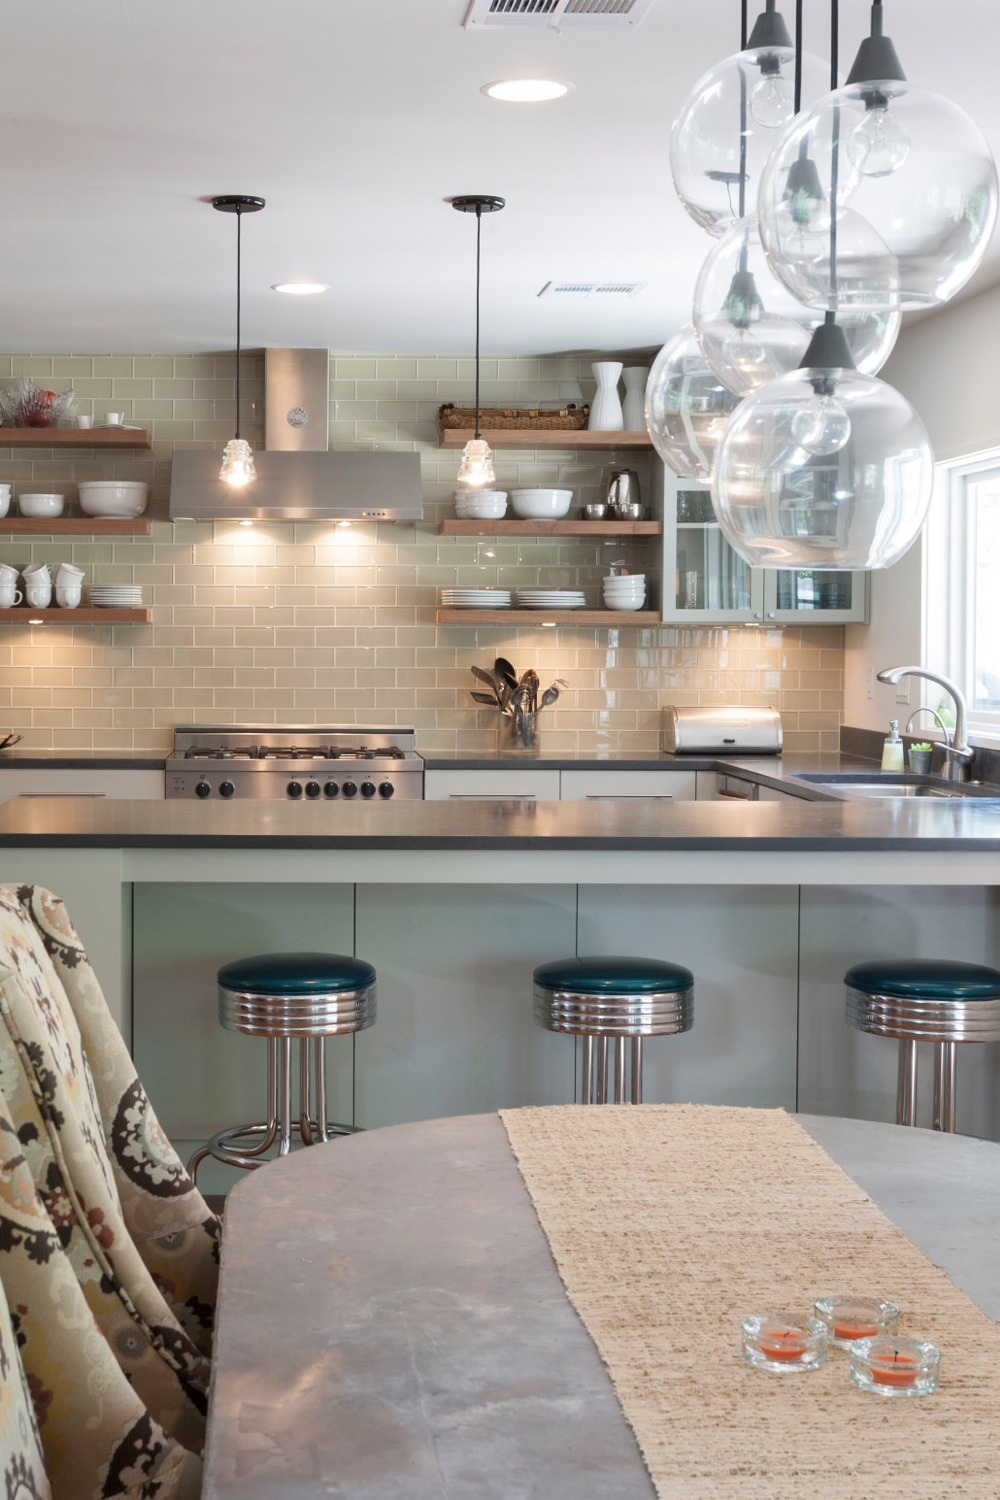 Concrete Grey Counters Taupe Green Glass Subway Tiles Flat Panel Cabinetry Hardwood Flooring